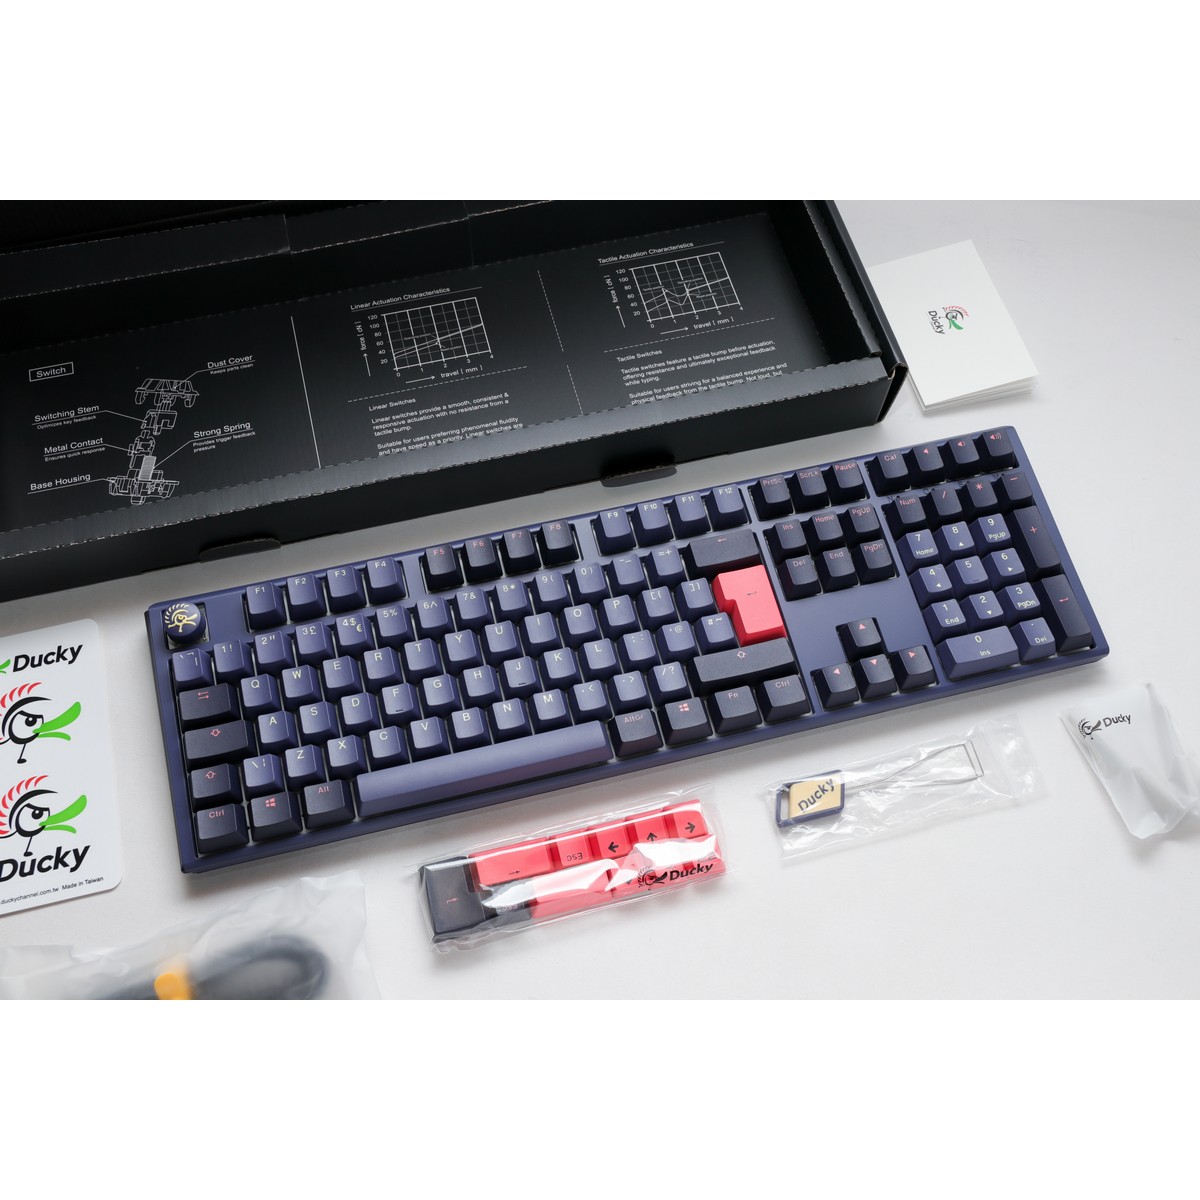 Ducky - Ducky One 3 Cosmic USB RGB Mechanical Gaming Keyboard Cherry MX Red Switch - UK Layout